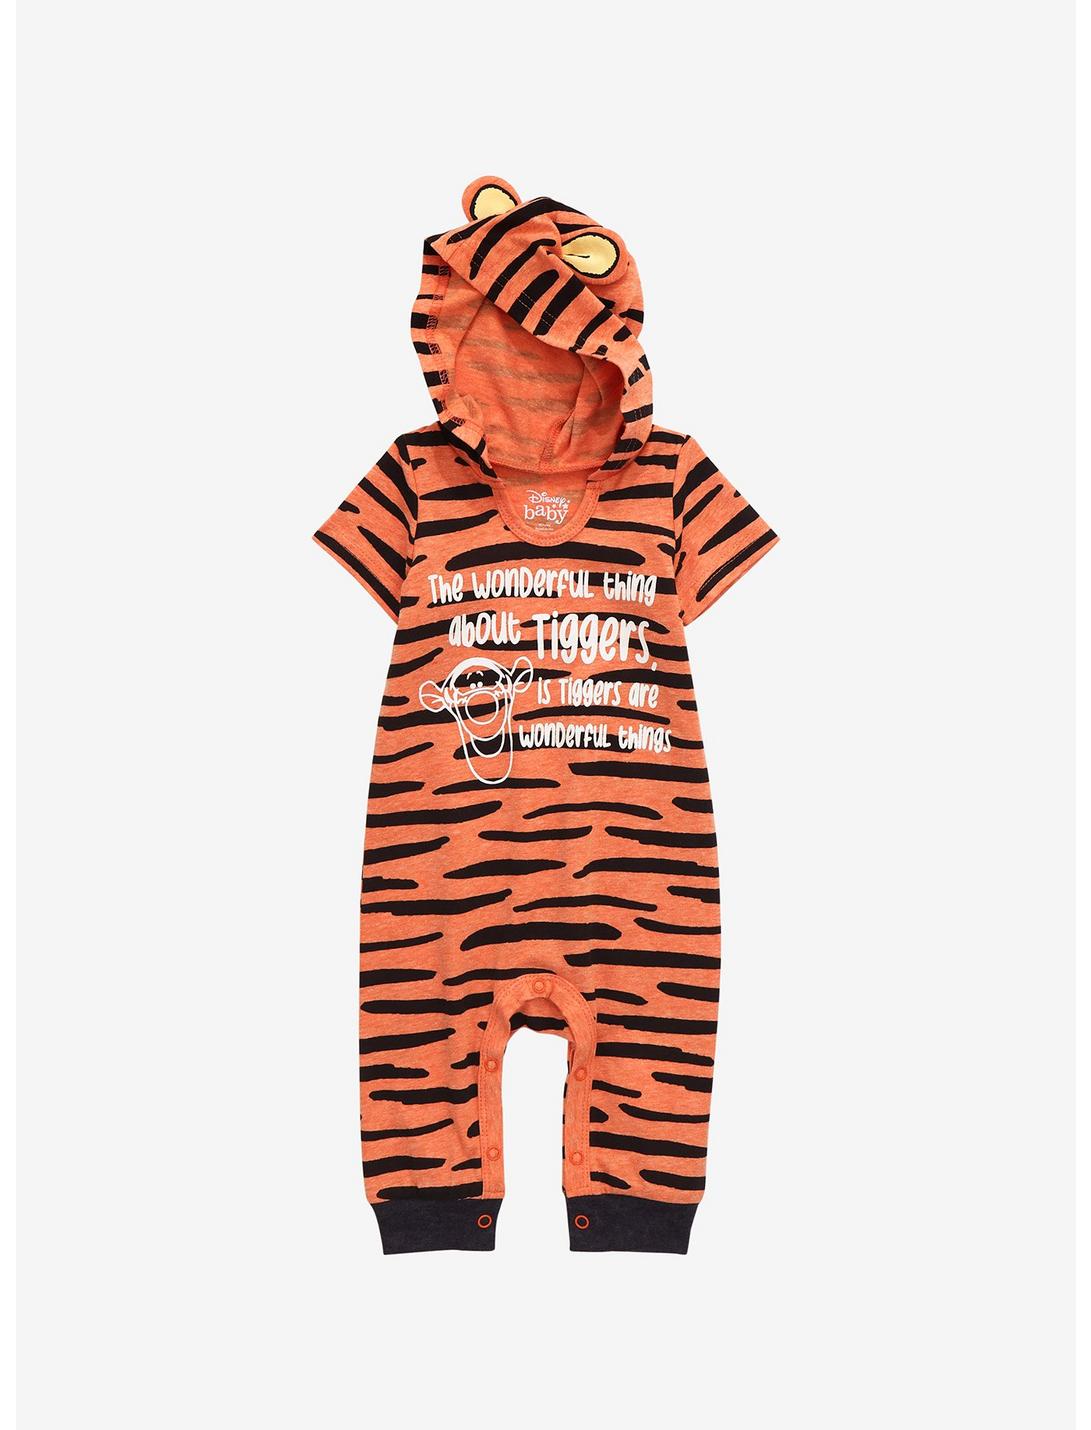 Disney Winnie the Pooh Wonderful Thing About Tiggers Infant One-Piece - BoxLunch Exclusive, BLACK, hi-res